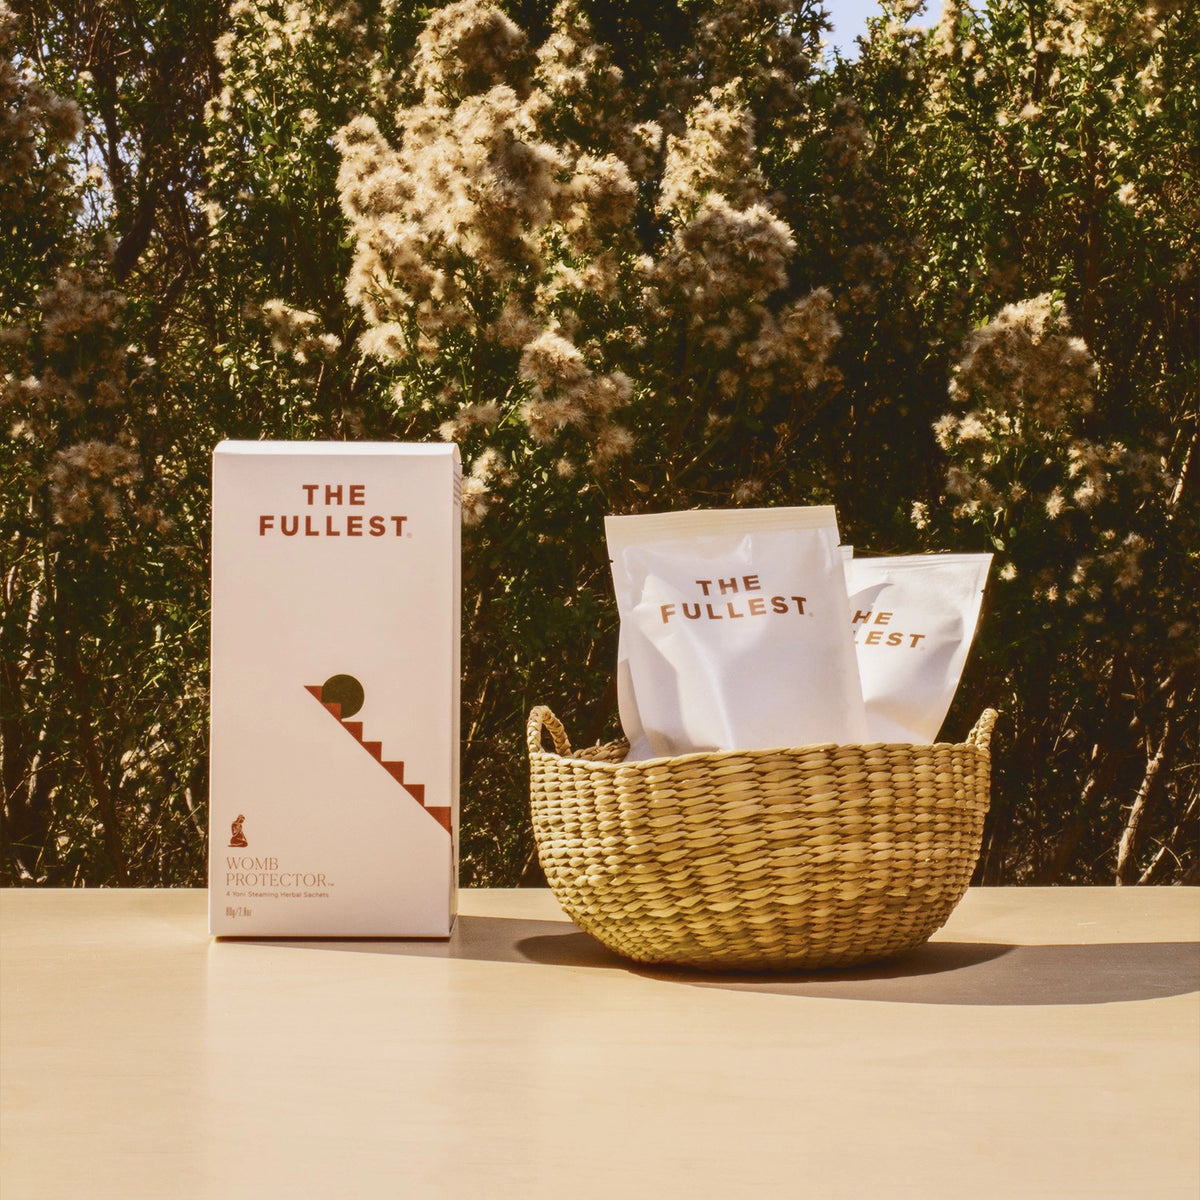 Product packaging and sachets from THE FULLEST&#39;s Womb Protector Ritual Bundle displayed on a table with a wicker basket and a pelvic steaming stool, set against a backdrop of leafy shrubs and fluffy white flowers.